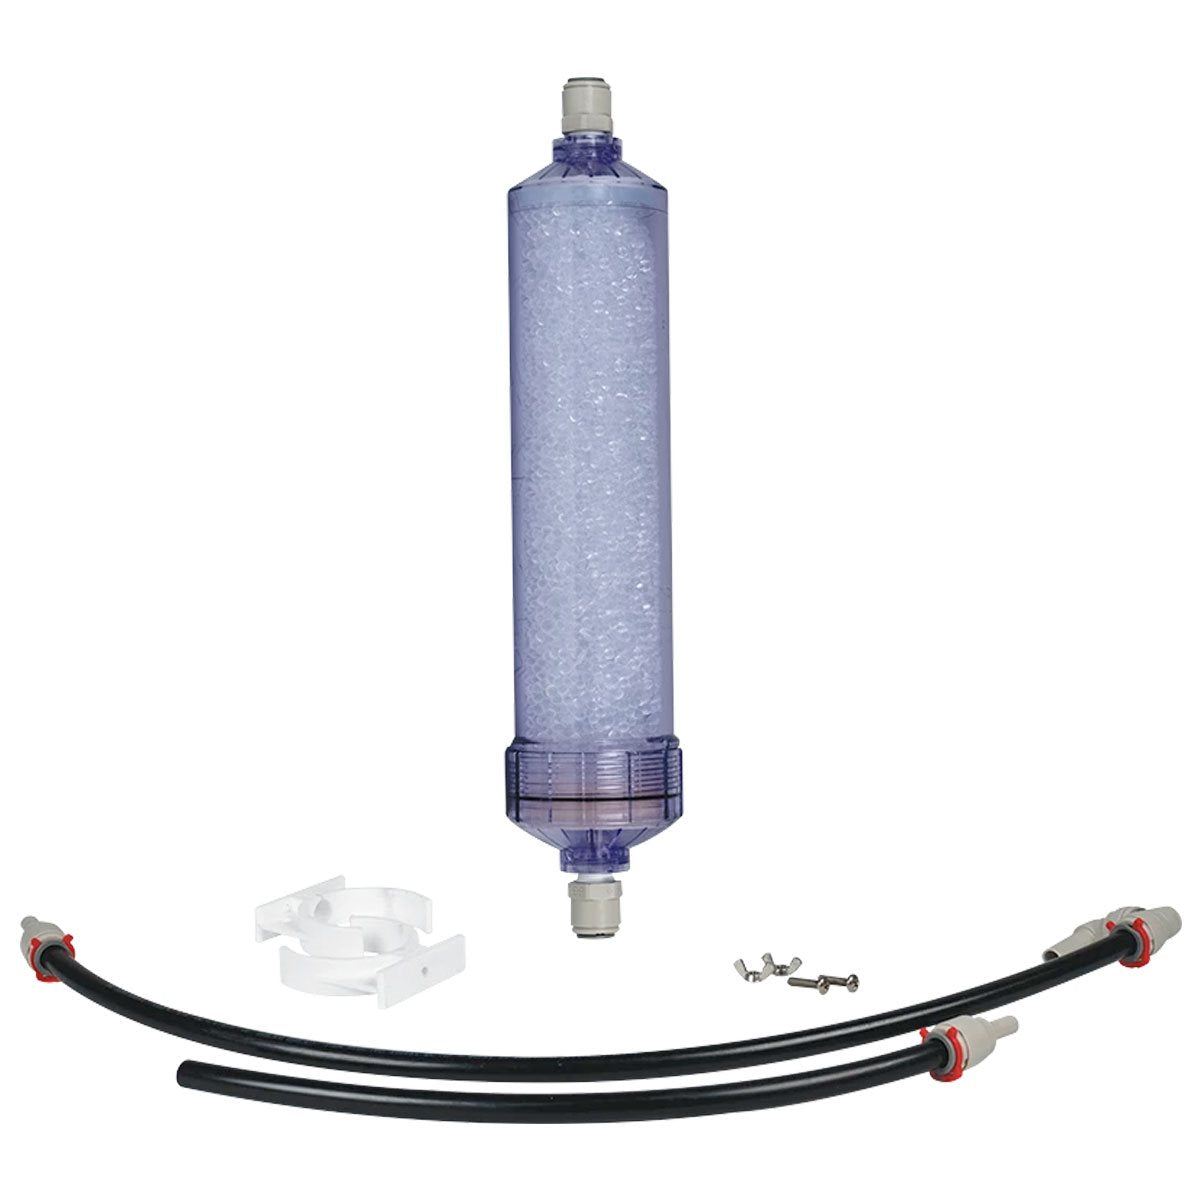 Product Image:Hydro-Logic HYDROID Antiscalant Kit Filter, fittings, tubing and clips